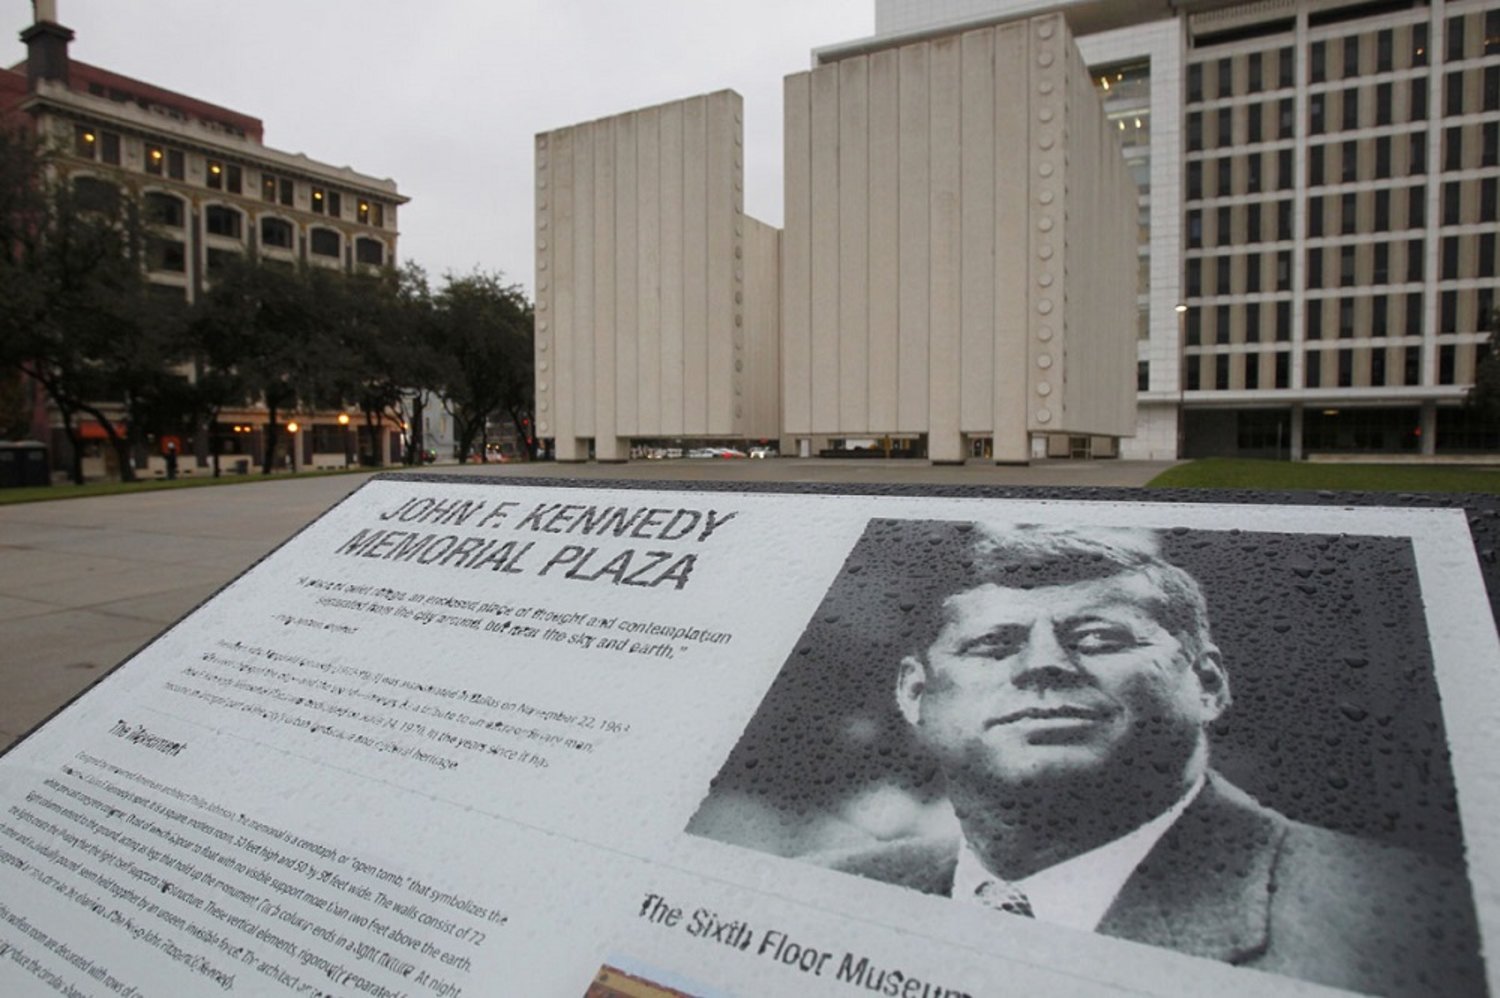 The John F. Kennedy Memorial Plaza is pictured in Dallas, Texas November 22, 2013. (Reuters)